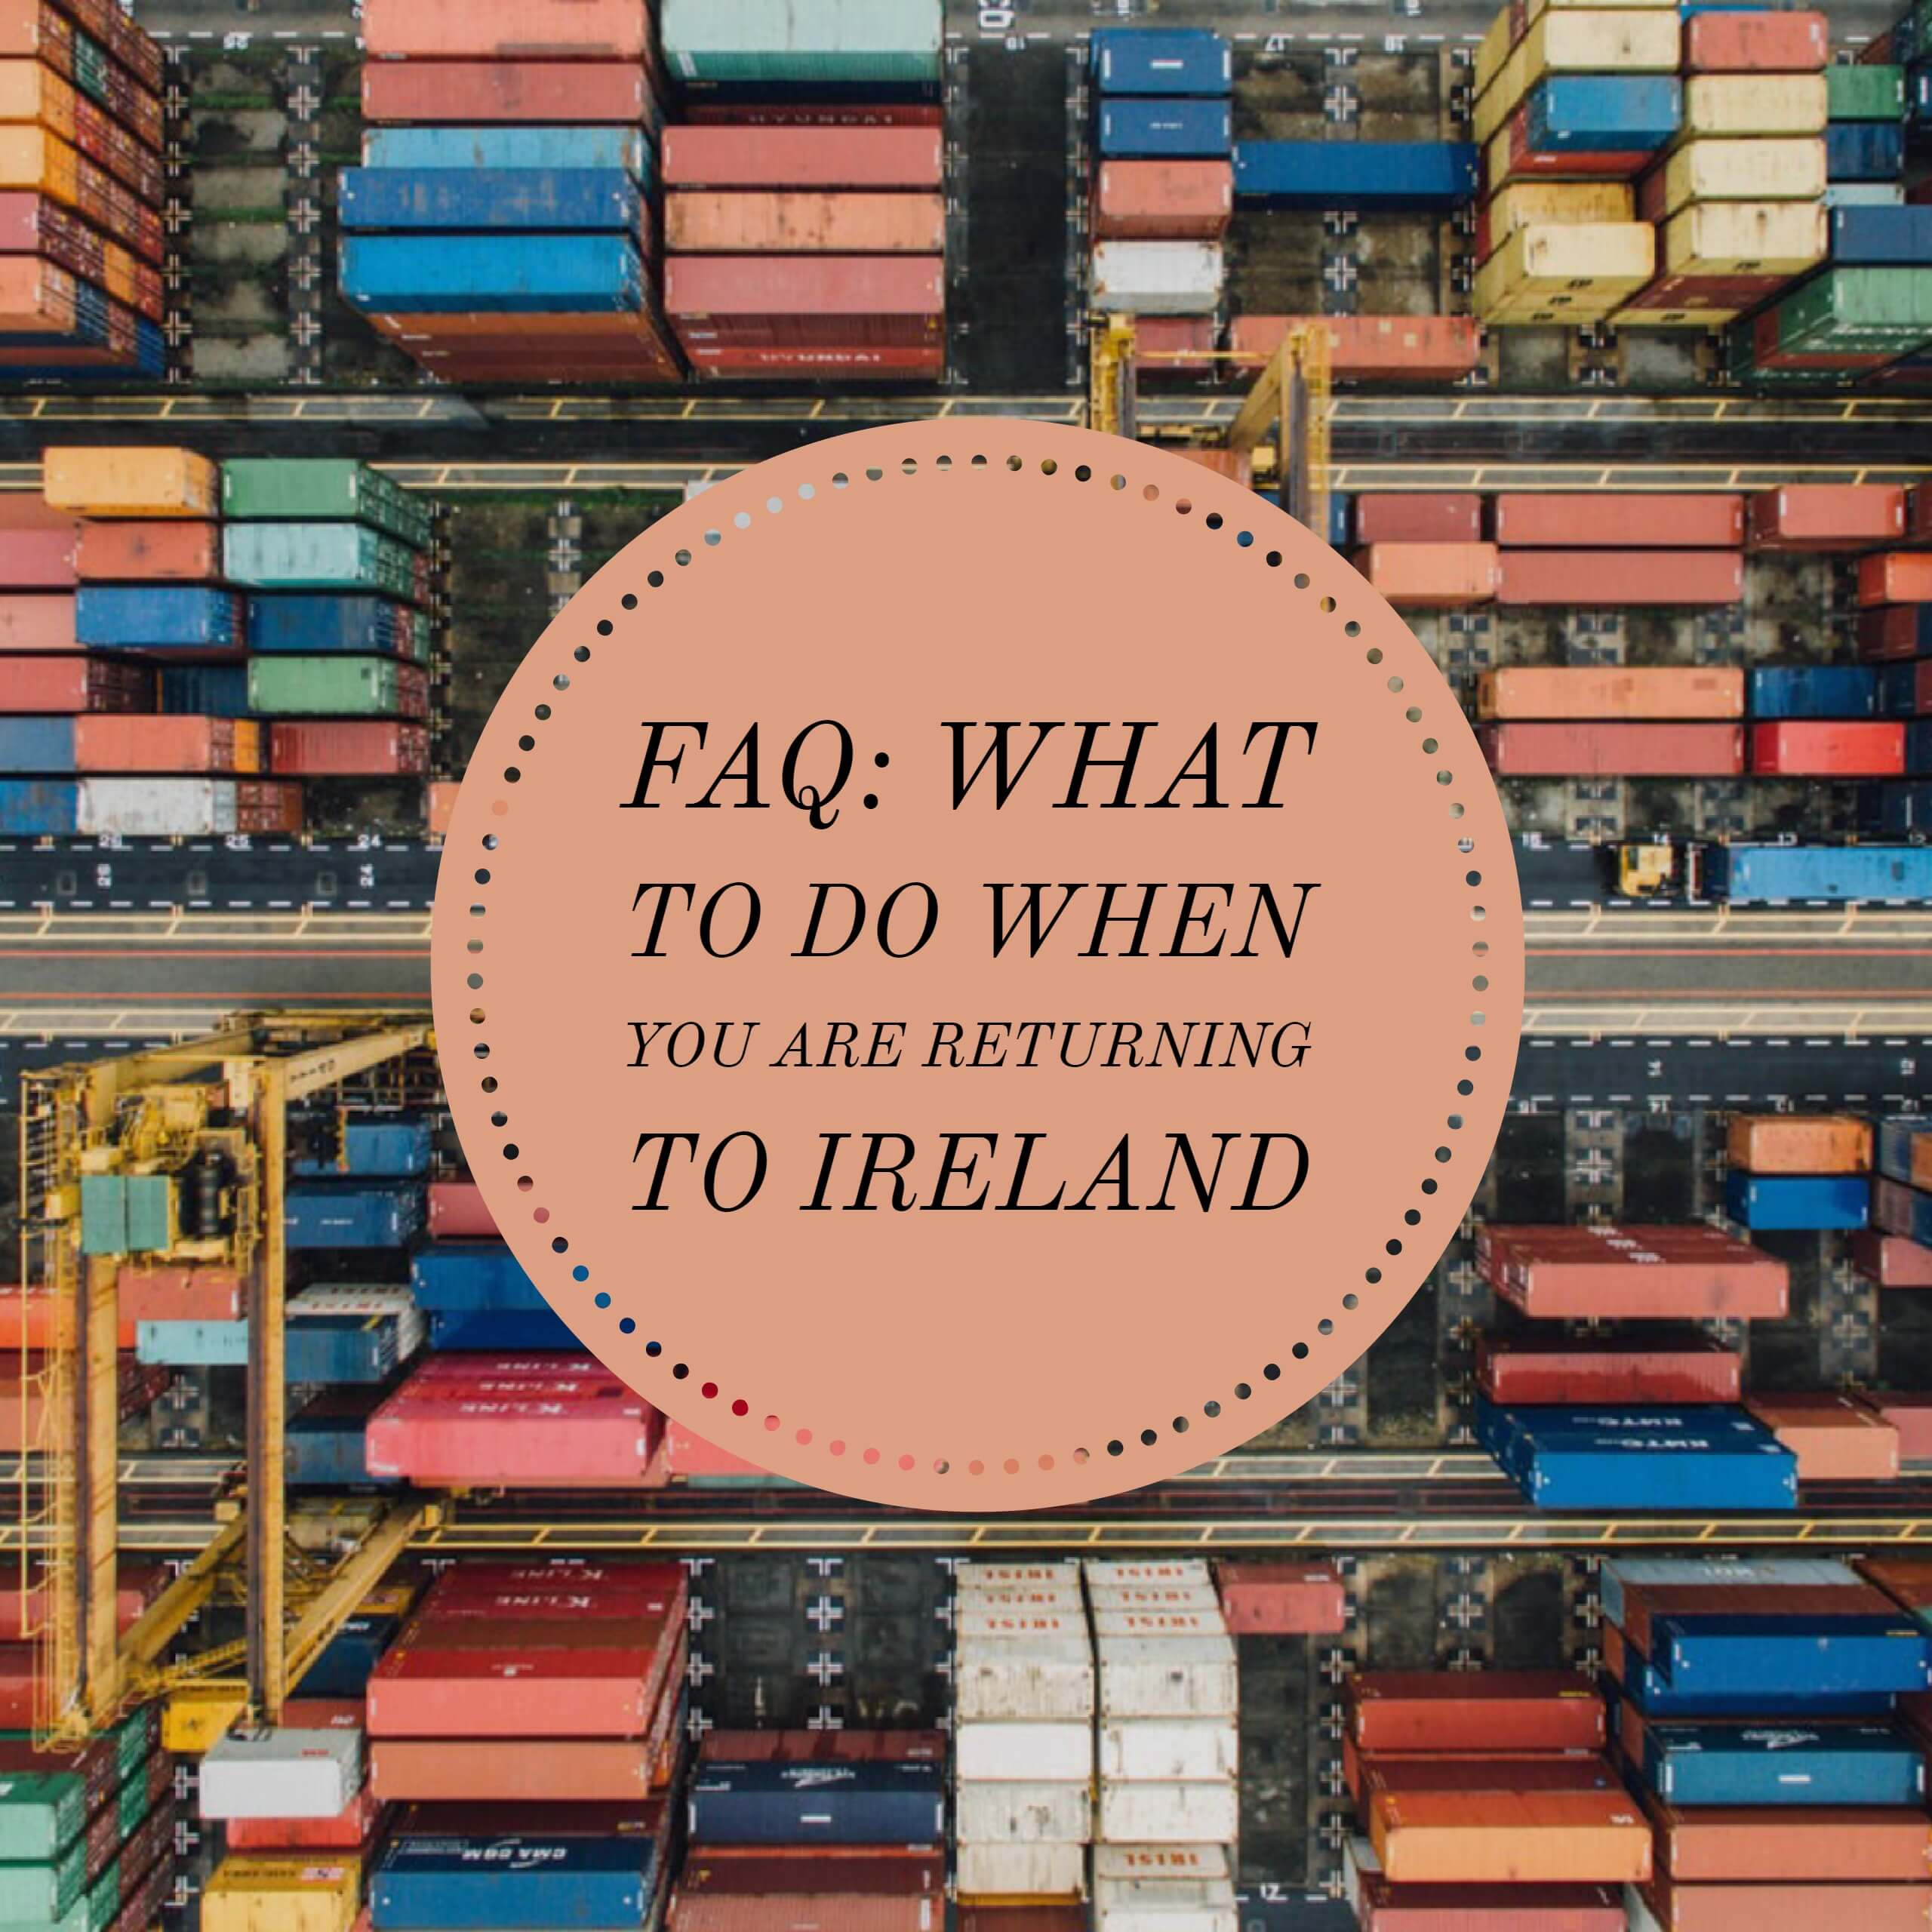 Faq on what to do when returning to Ireland